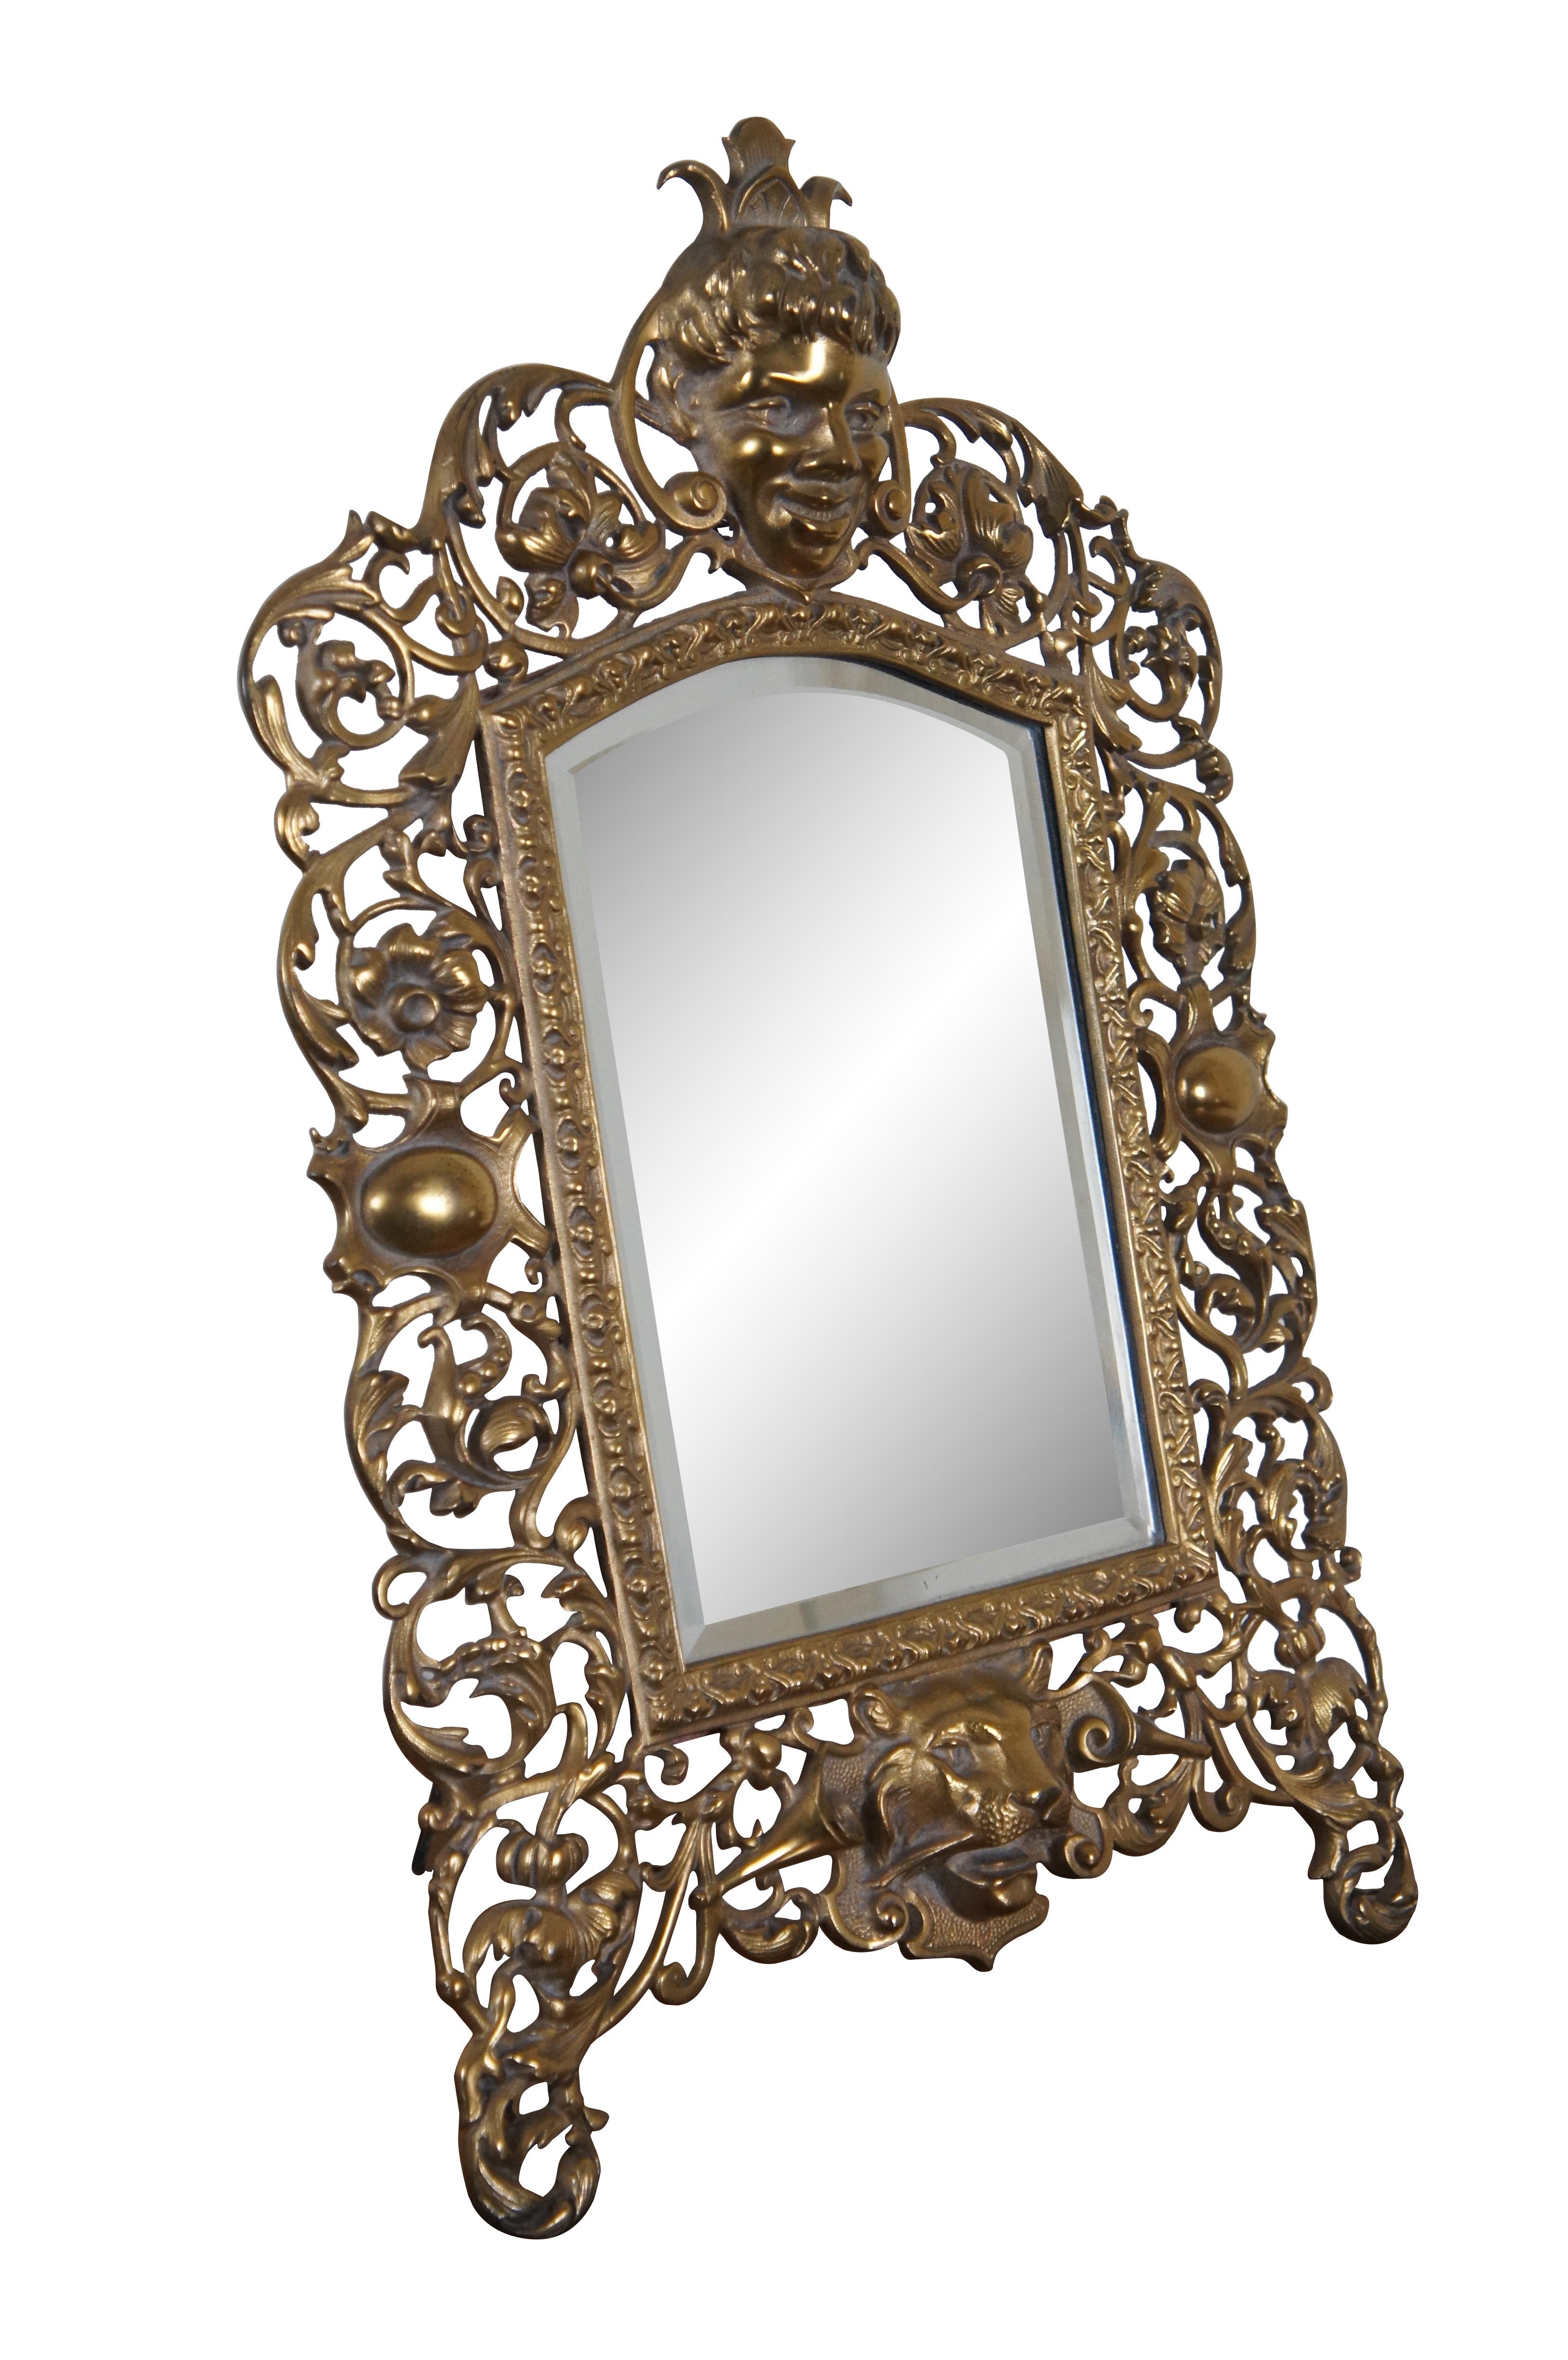 A large and heavy antique Victorian tabletop or wall hanging beveled vanity mirror.  Made of gilded cast iron featuring reticulated or pierced baroque / rococo style with floral acanthus swags, trumpets, and Lion and Cherub